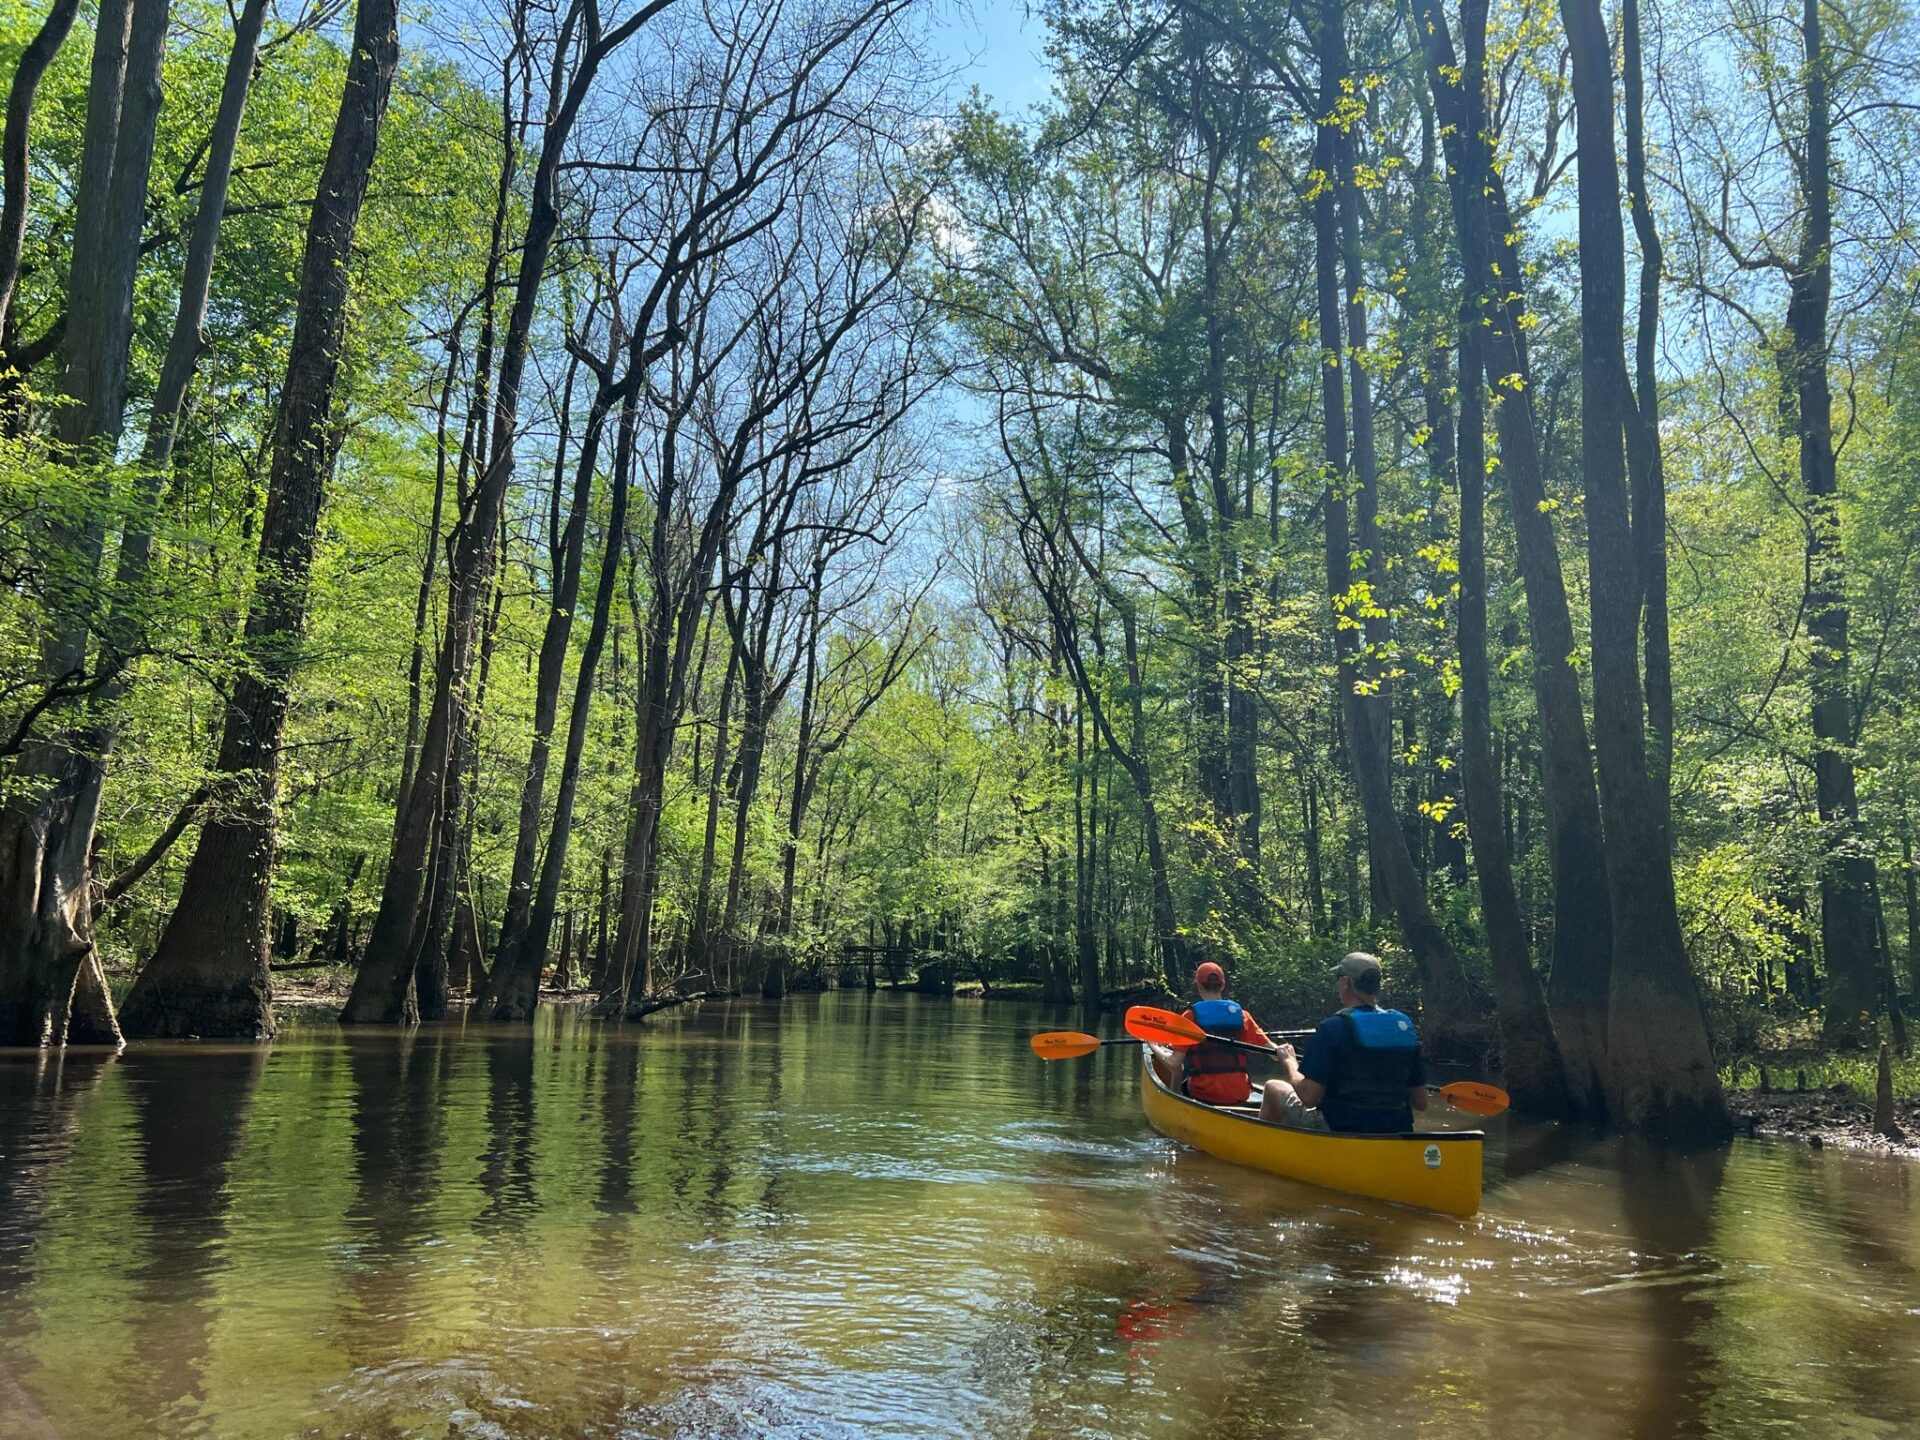 Visiting Congaree National Park:  Which Parks are “Worth” it?